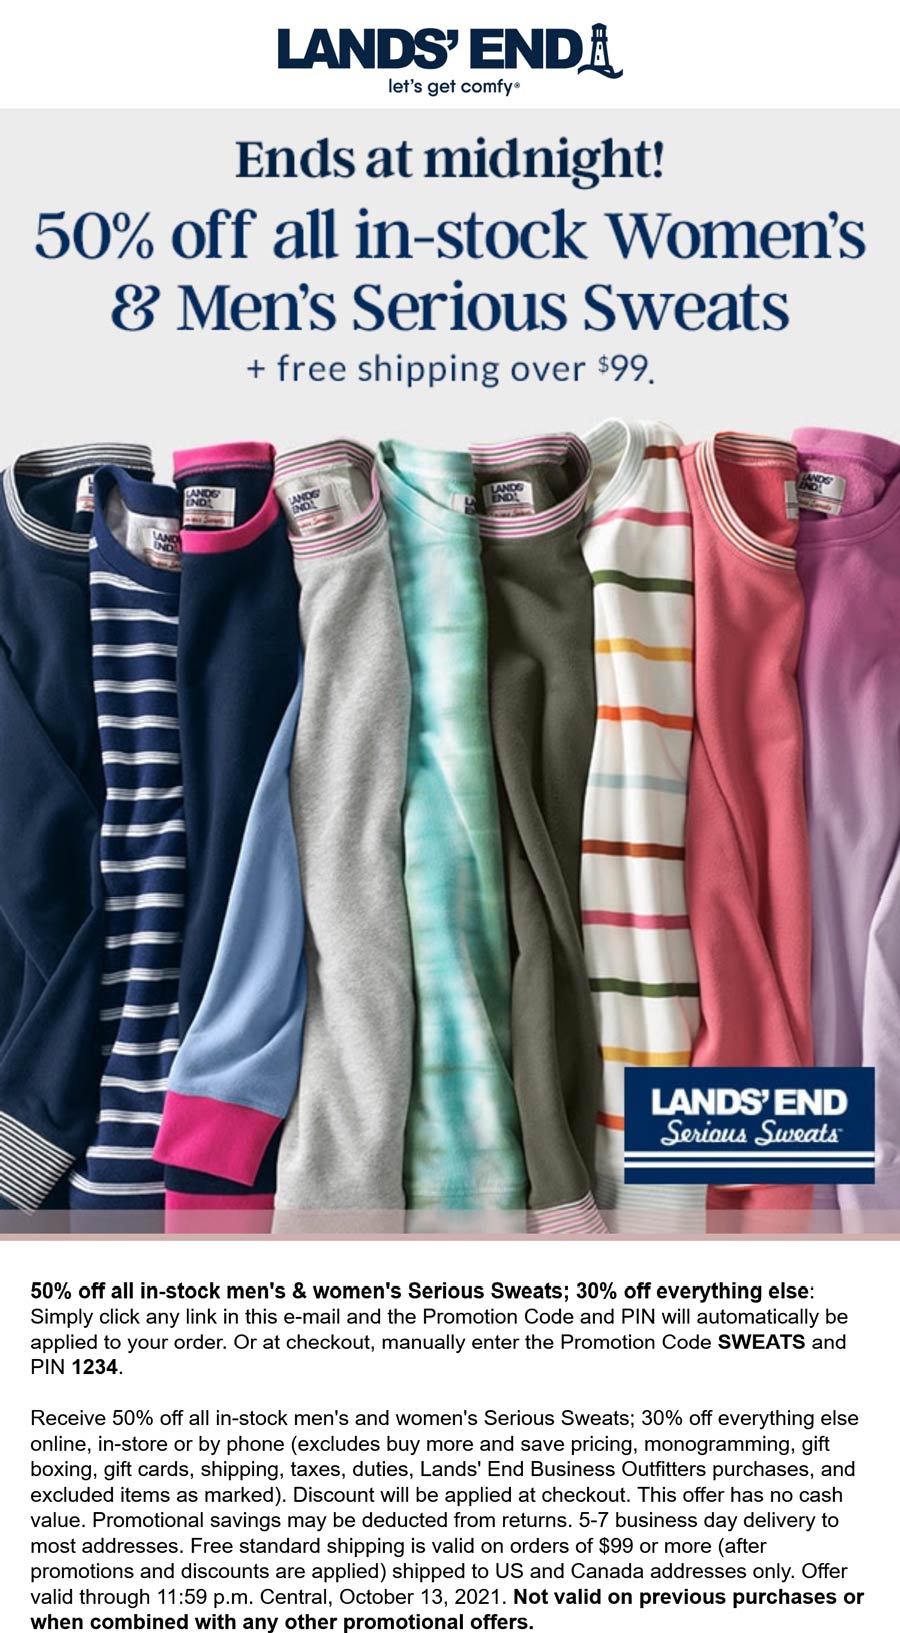 Lands End stores Coupon  30% off everything & 50% off sweats today at Lands End via promo code SWEATS and pin 1234 #landsend 